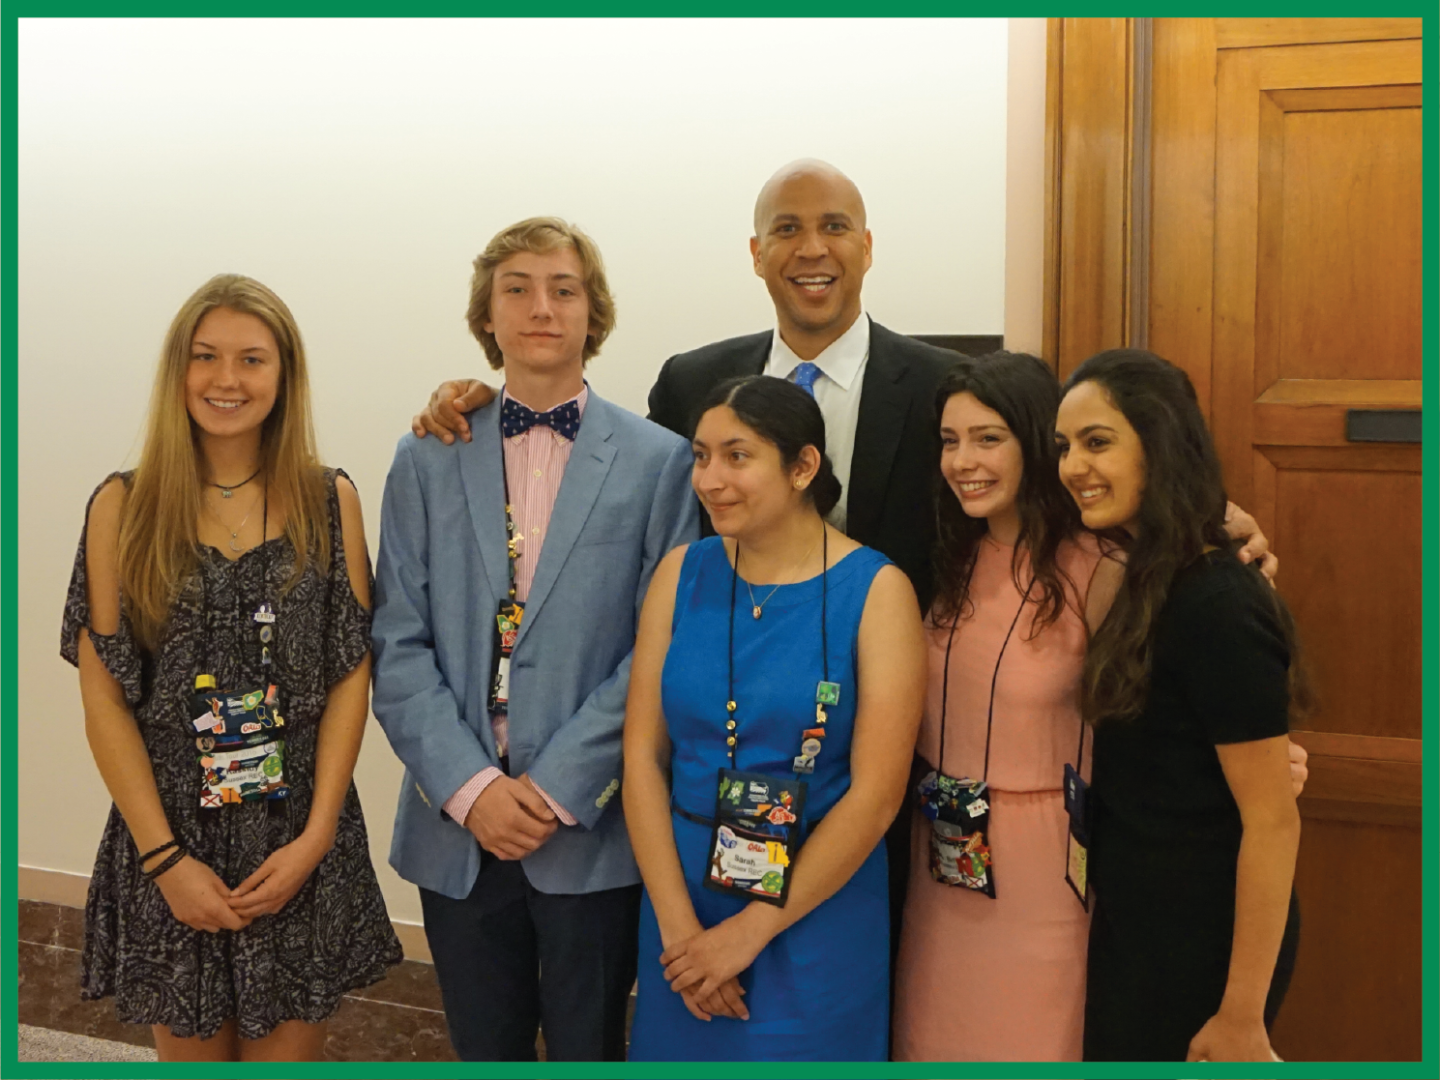 NJ students from 2016's Youth Tour trip pose for a photo with NJ Senator Cory Booker